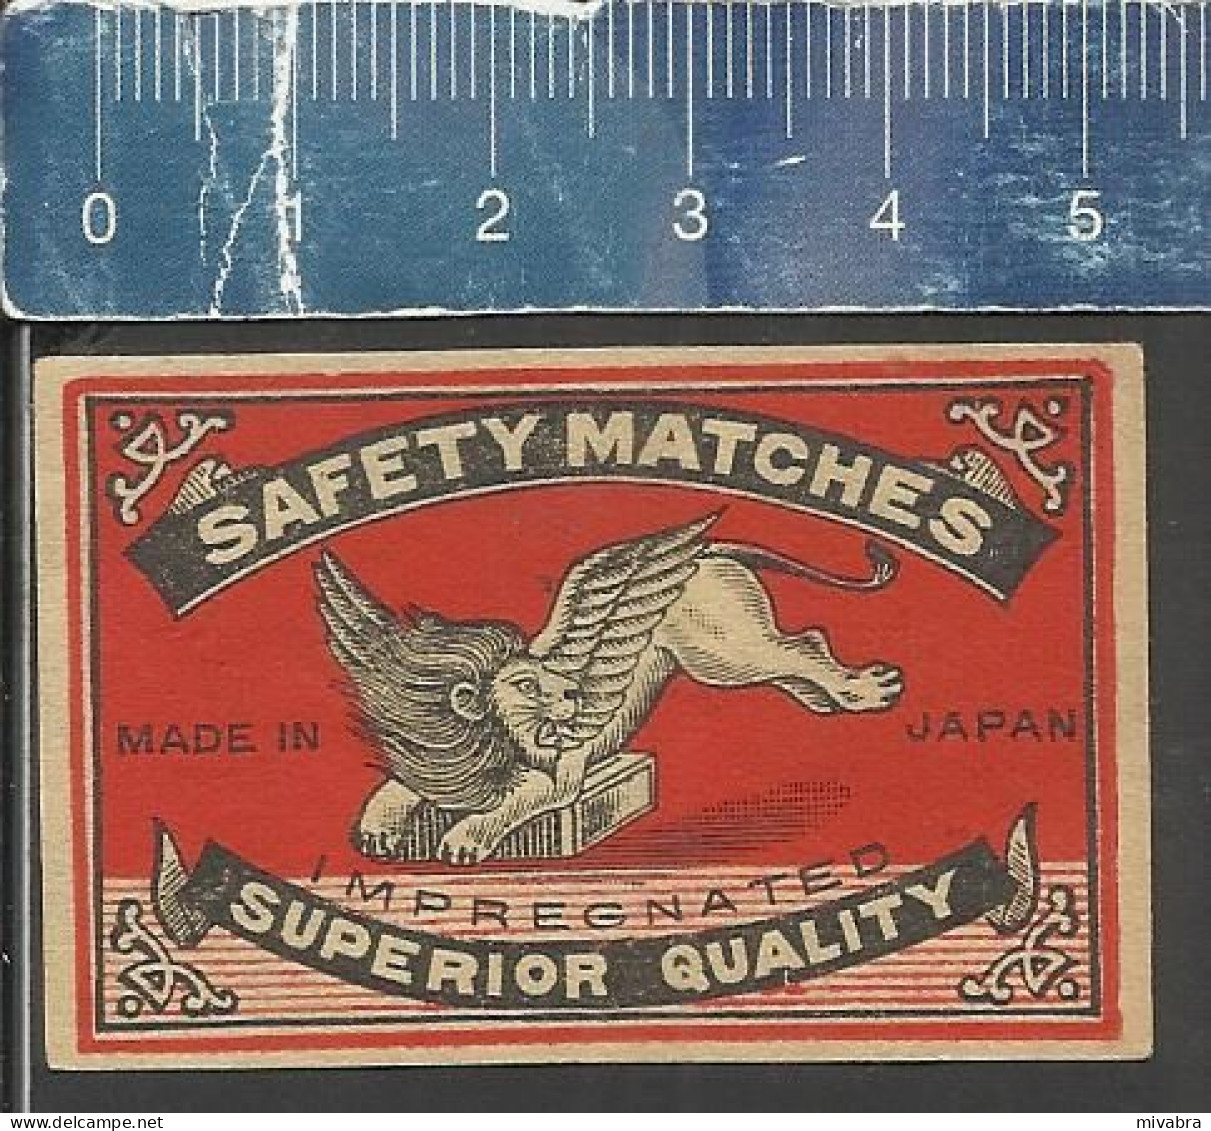 WINGED LION WITH WINGS SAFETY MATCHES IMPREGNATED SUPERIOR QUALITY - OLD VINTAGE MATCHBOX LABEL MADE JAPAN - Cajas De Cerillas - Etiquetas